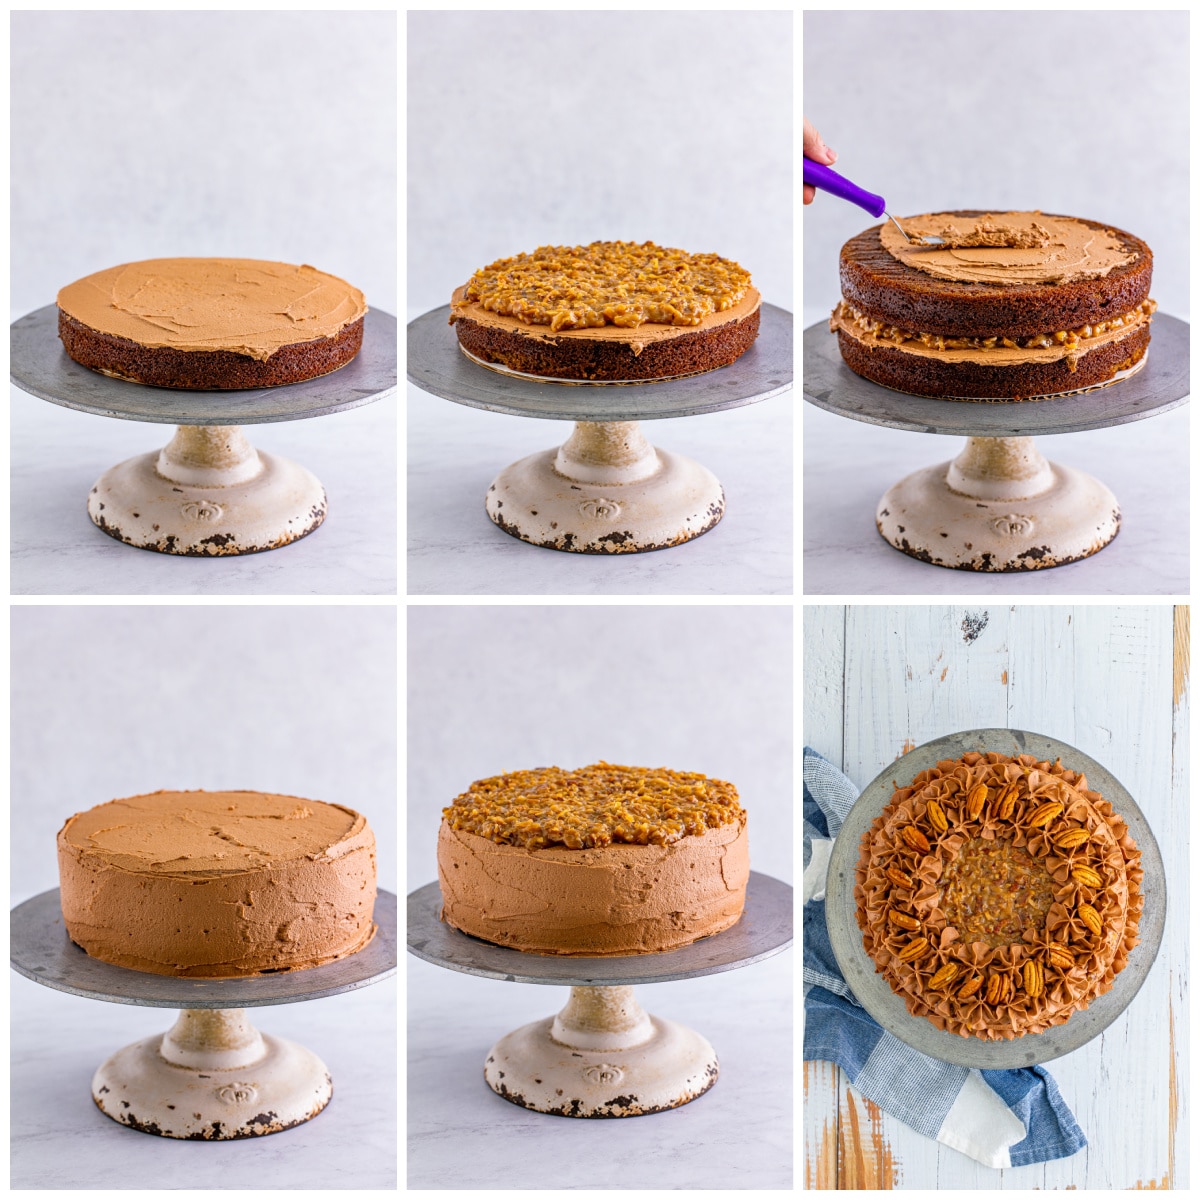 Step by step photos on how to assemble a German Chocolate Cake Recipe.